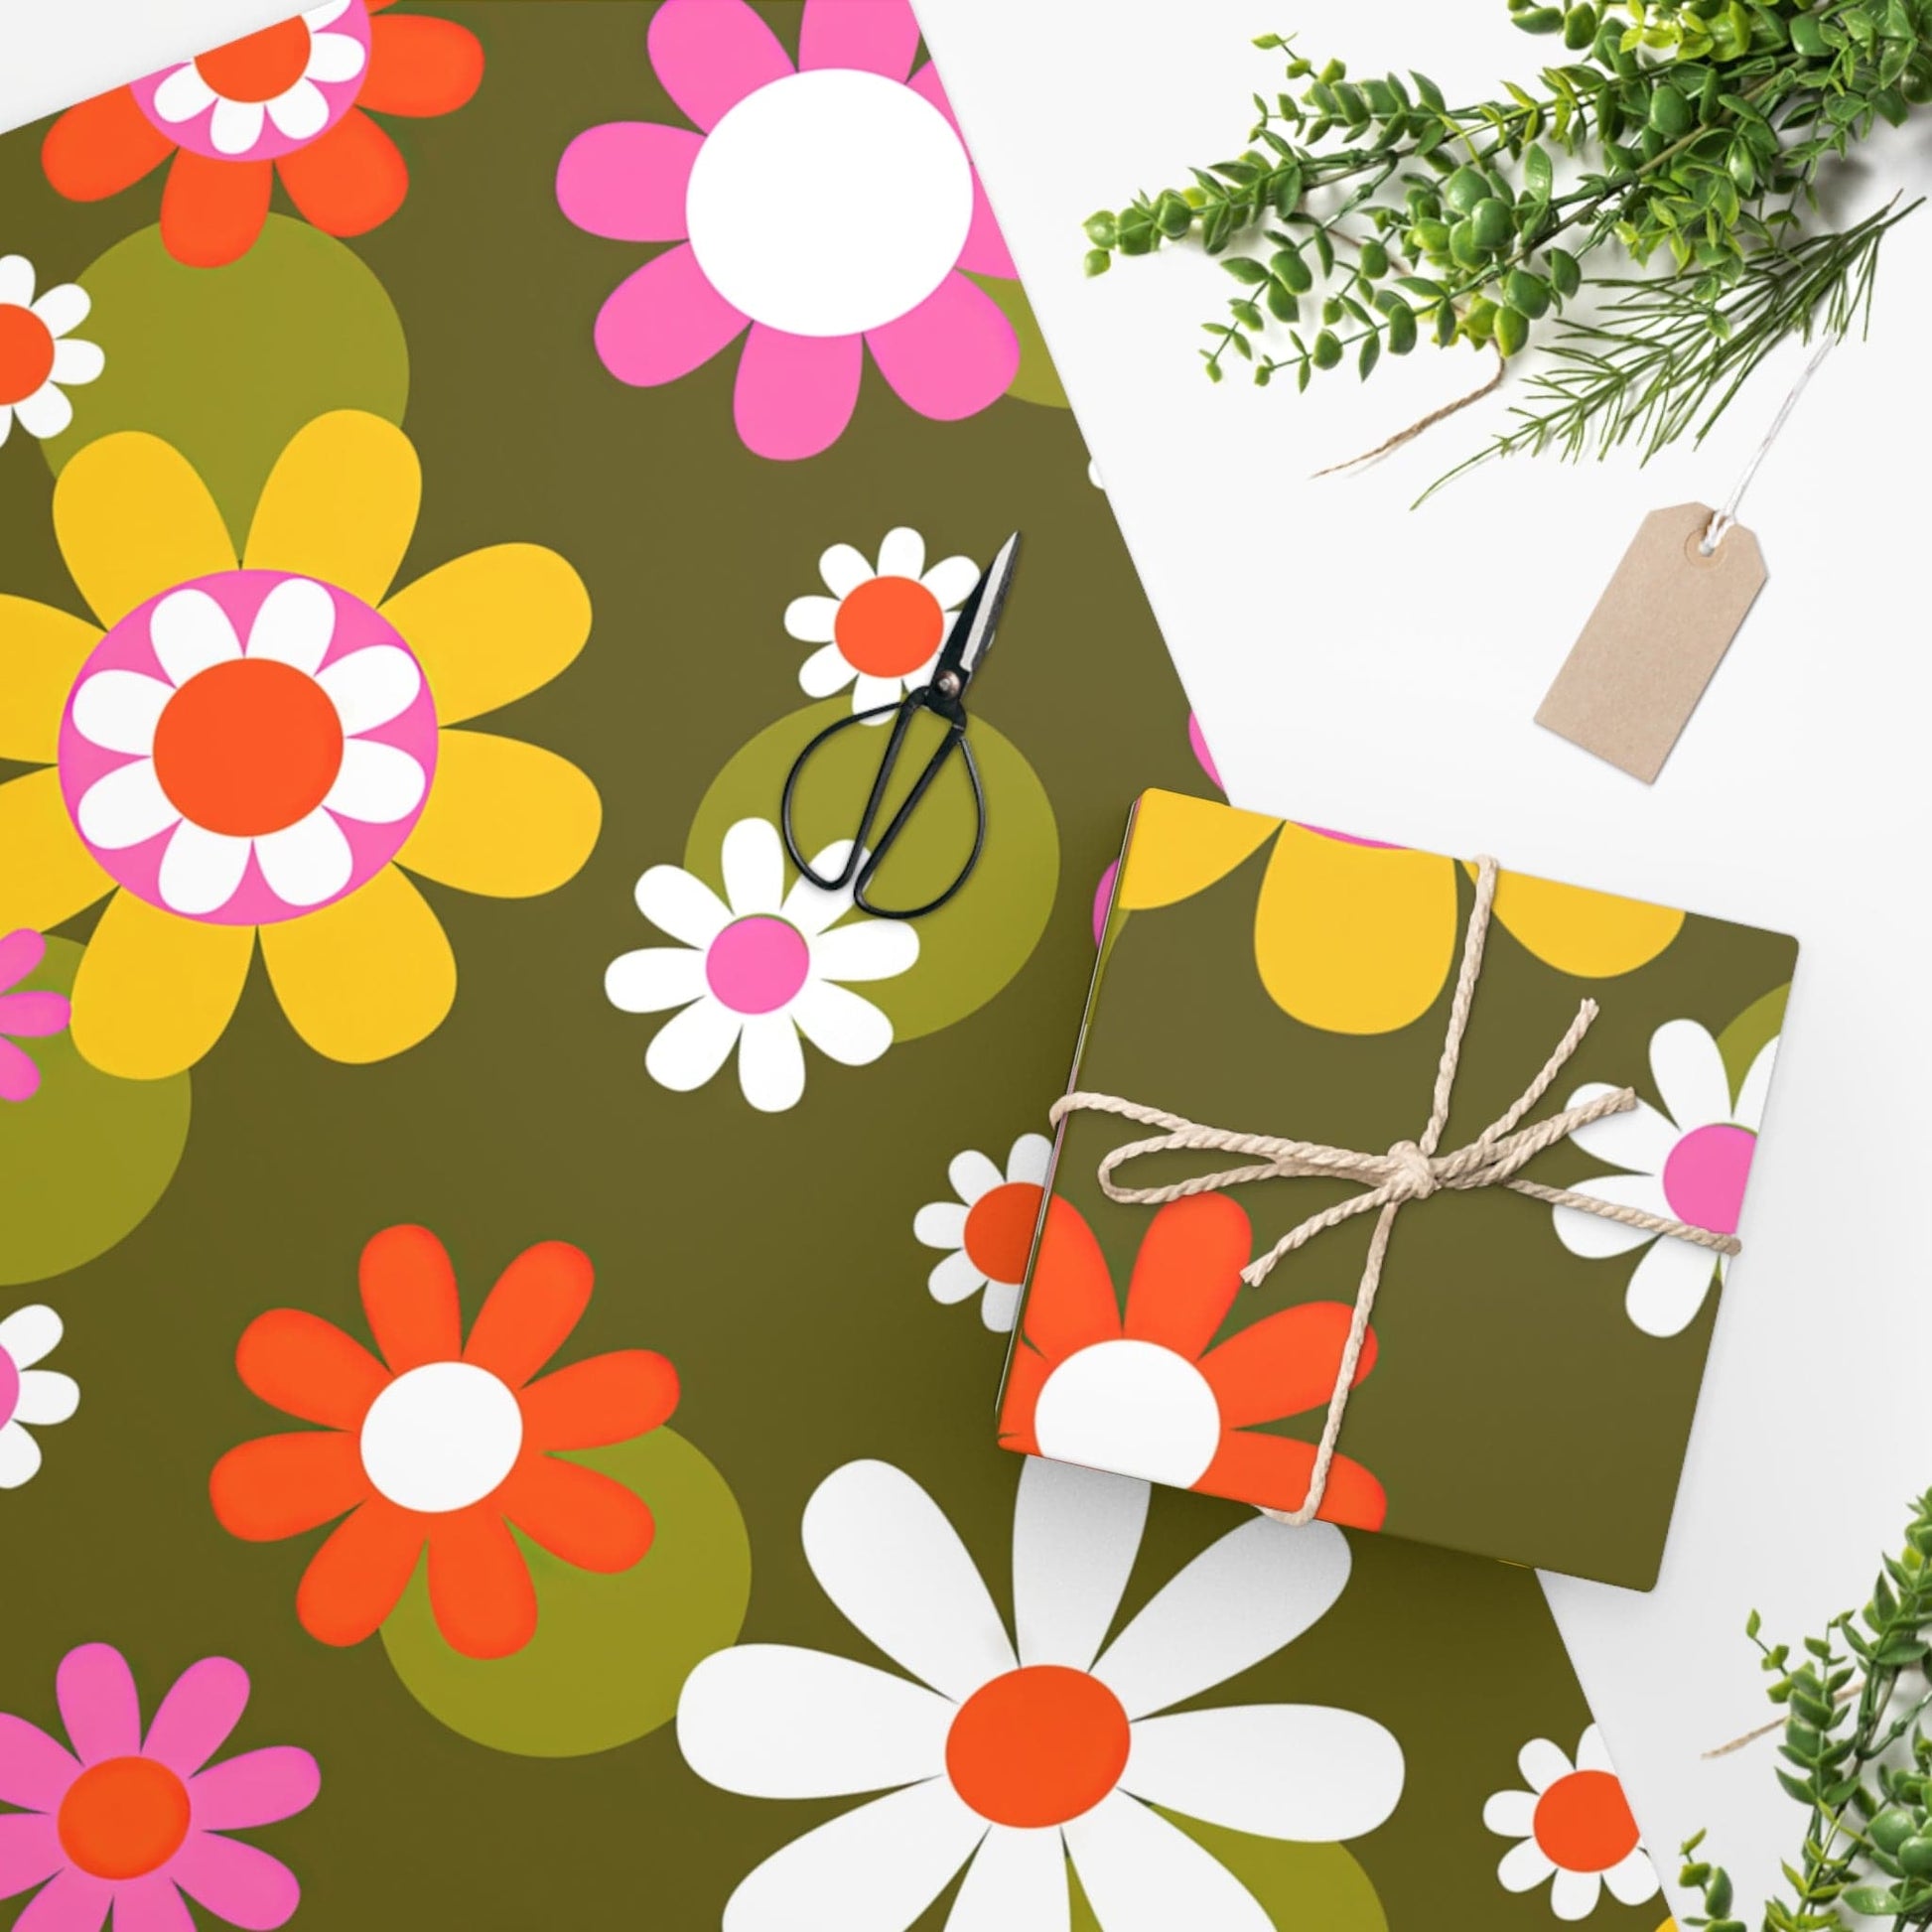 Printify Groovy Hippie Daisy Flower Power Wrapping Paper, Mid Century Modern Retro Gift Wrap Home Decor 24" × 60" 11859082243321882187